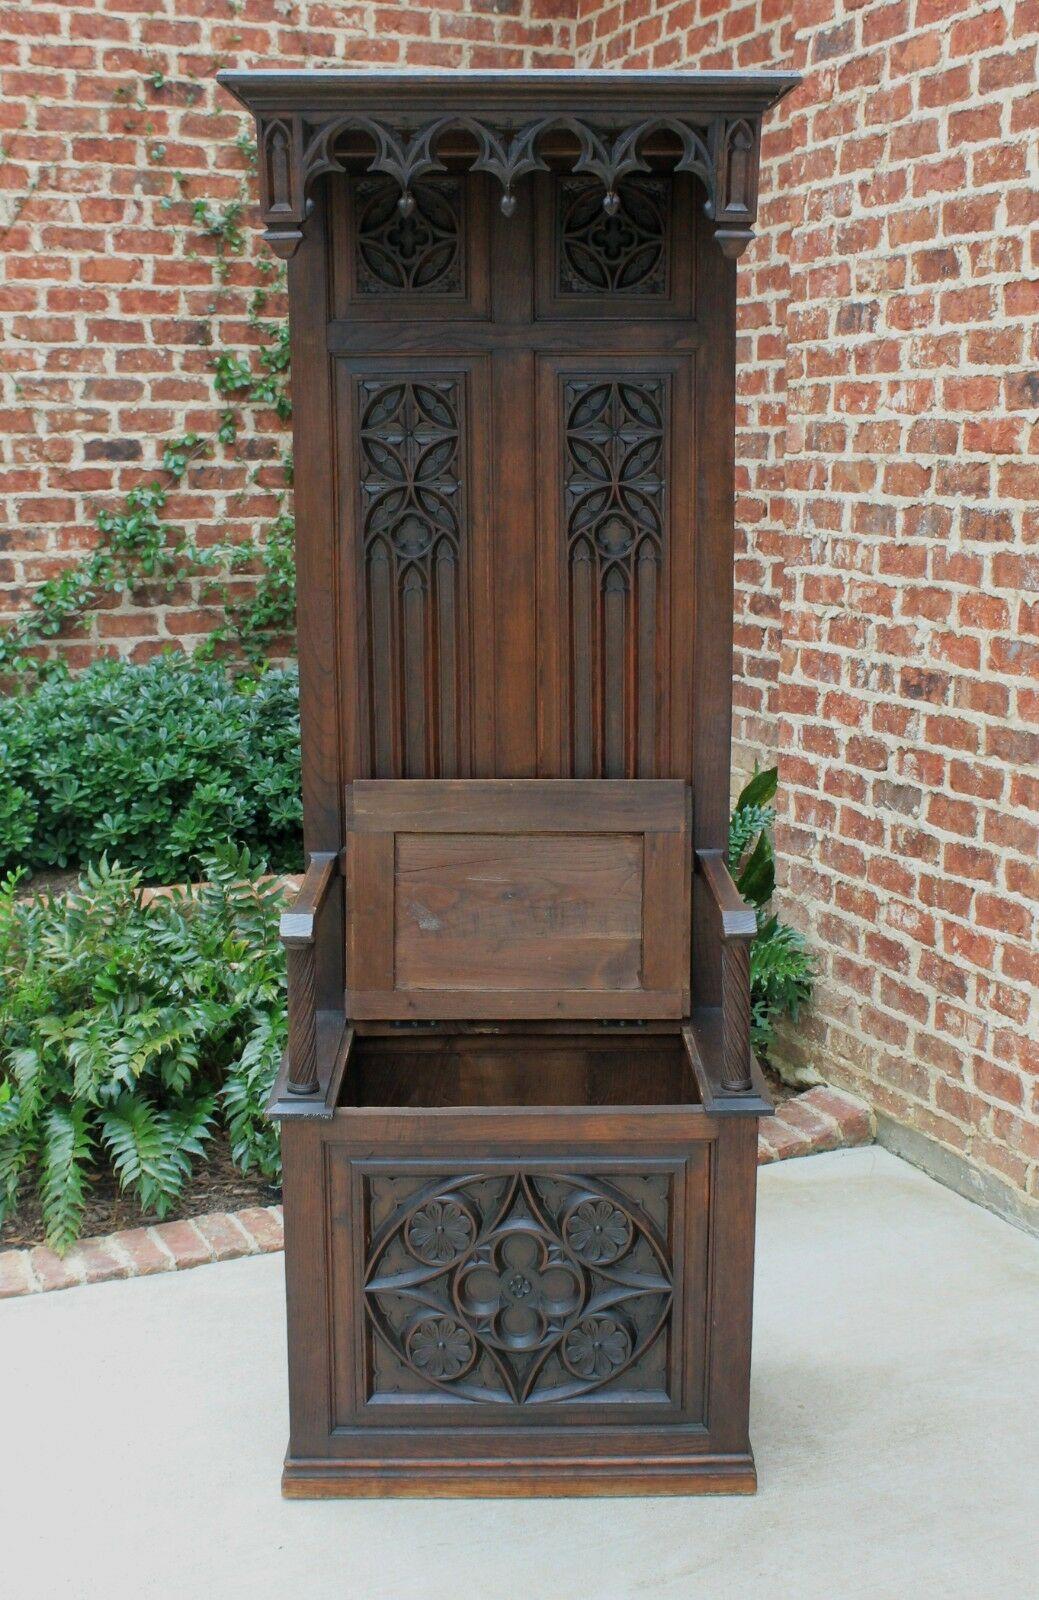 Antique French Carved Oak Hall Seat Monk's Bench Throne Chair Canopy Tall 19th C 5